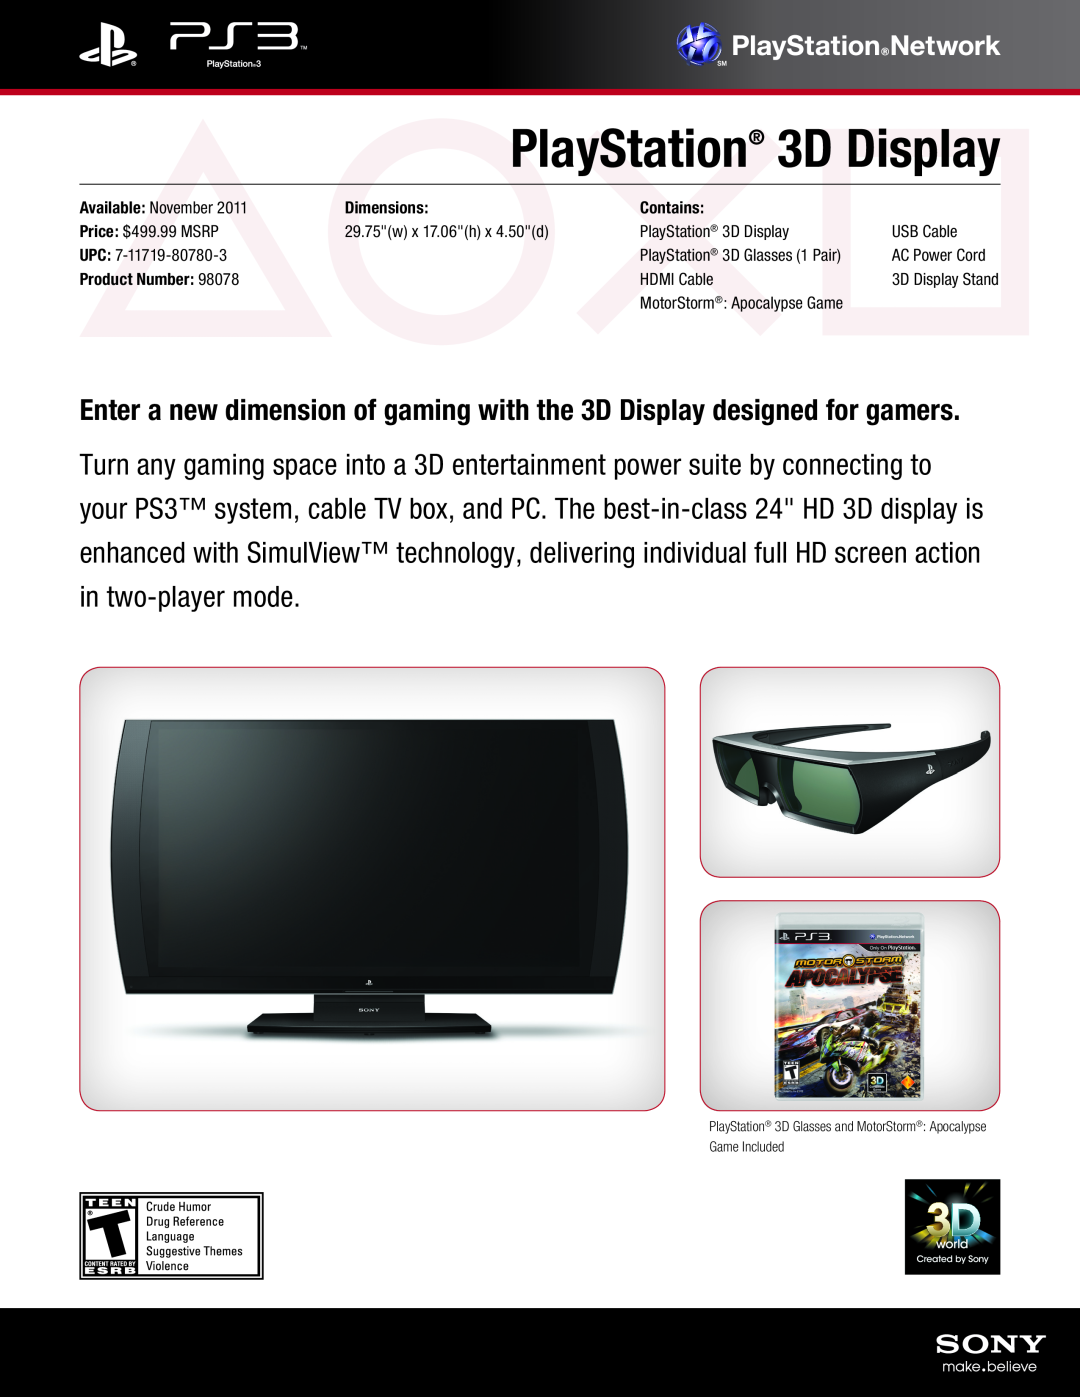 Sony 98078 dimensions PlayStation 3D Display, Dimensions, Contains, Product Number 